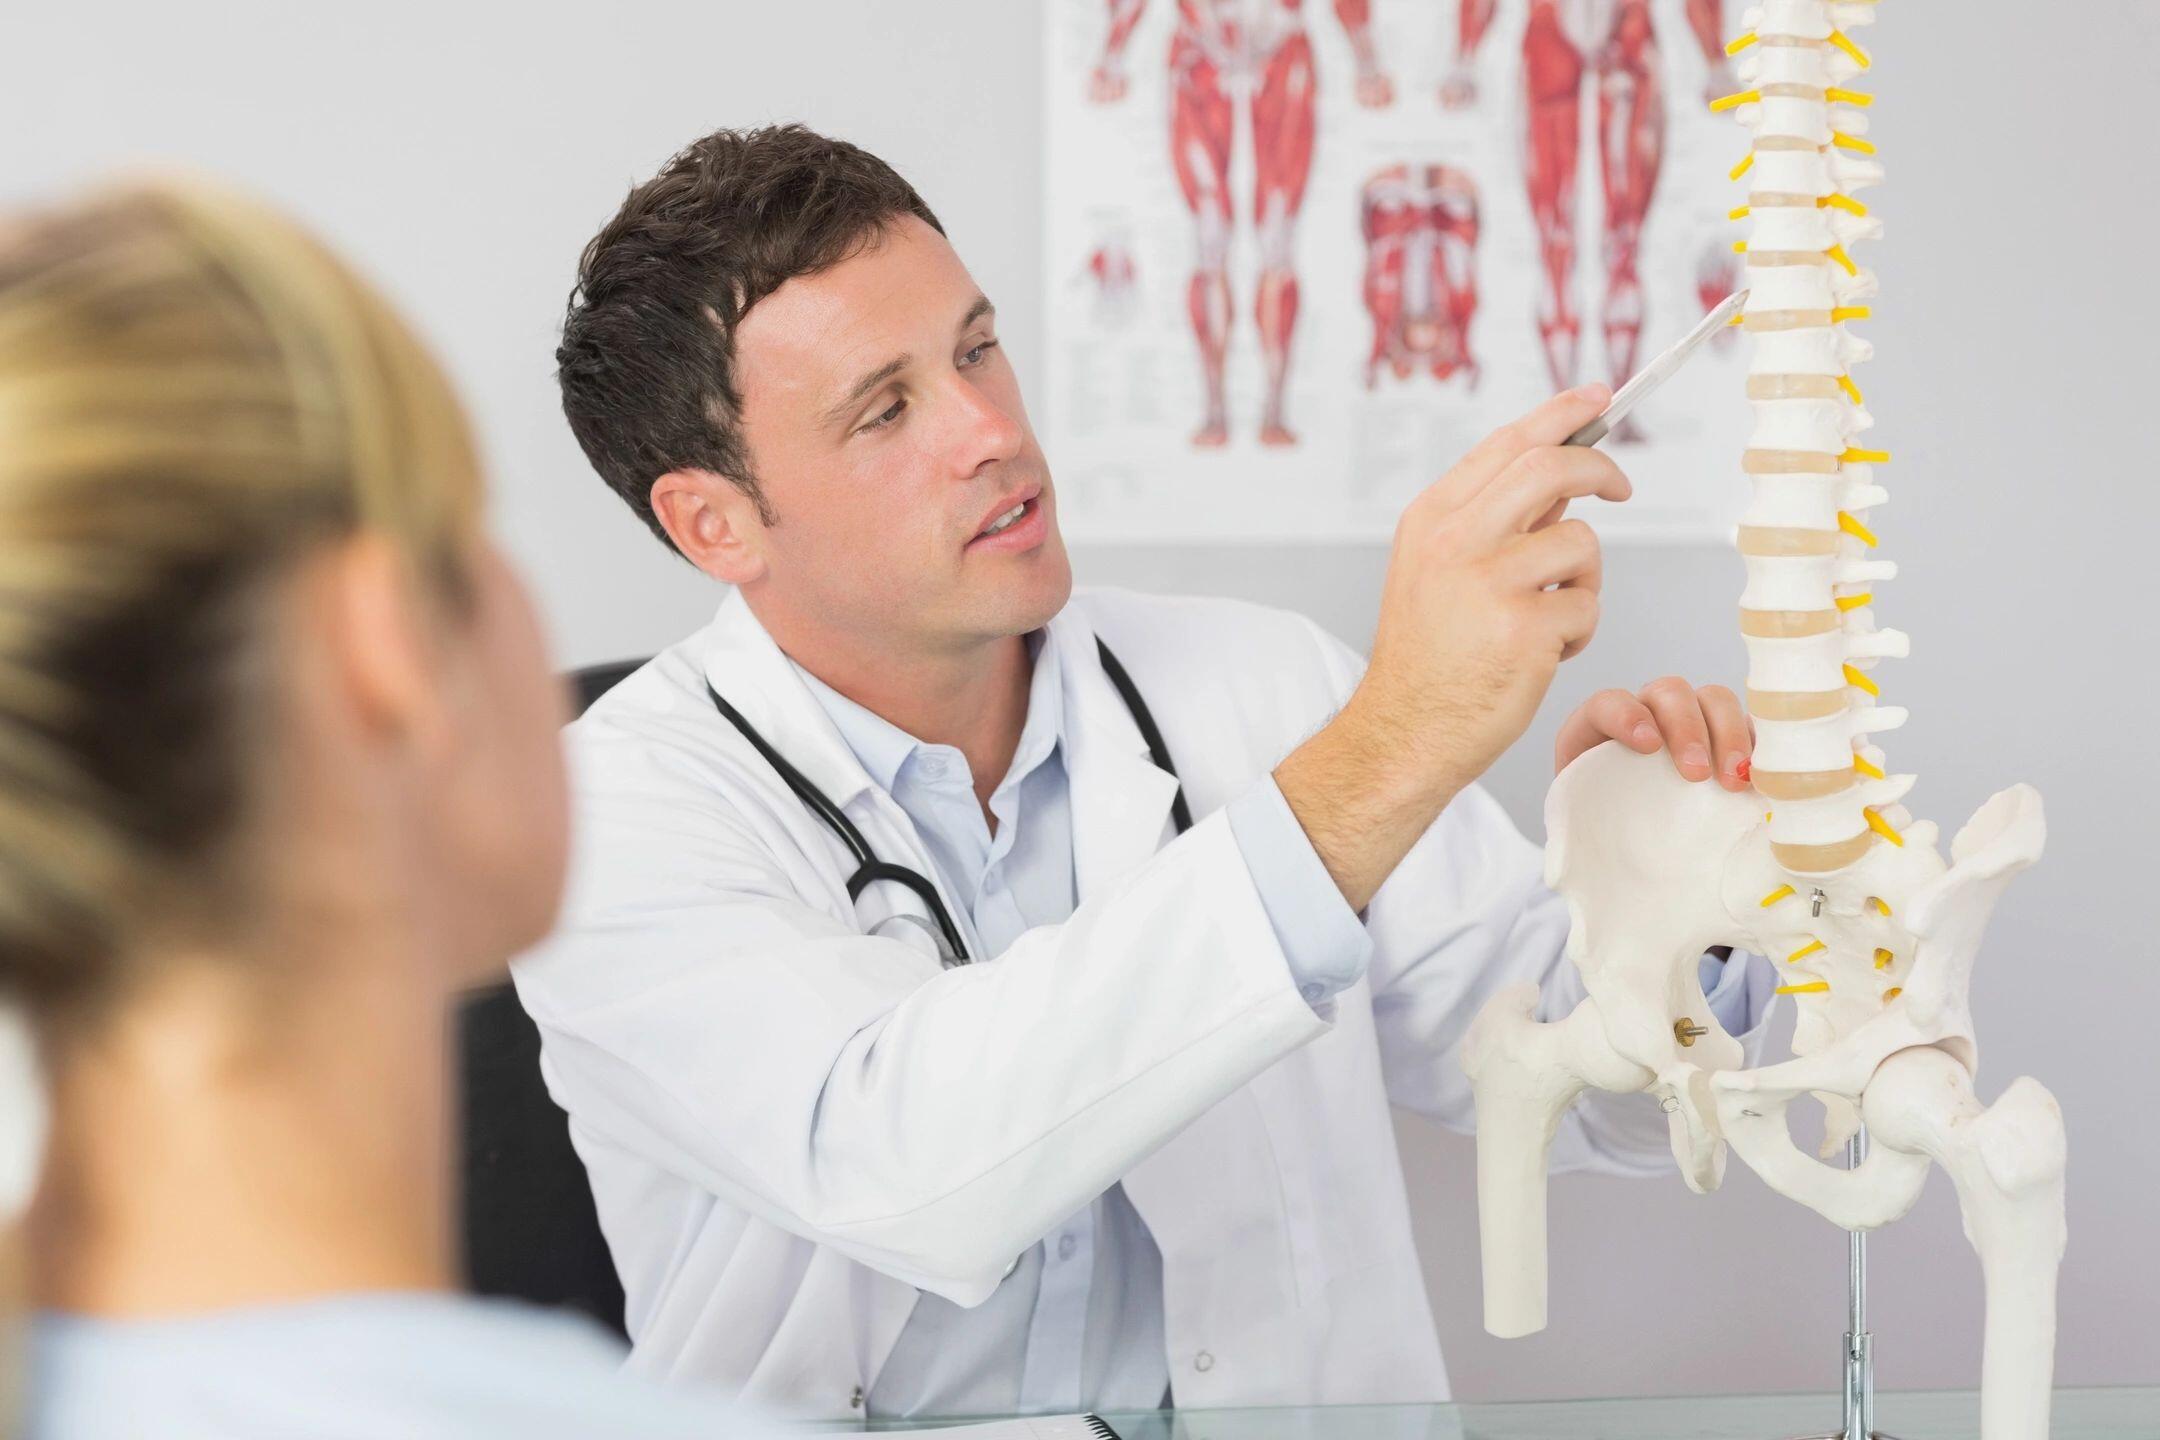 Conditions treated by a chiropractor